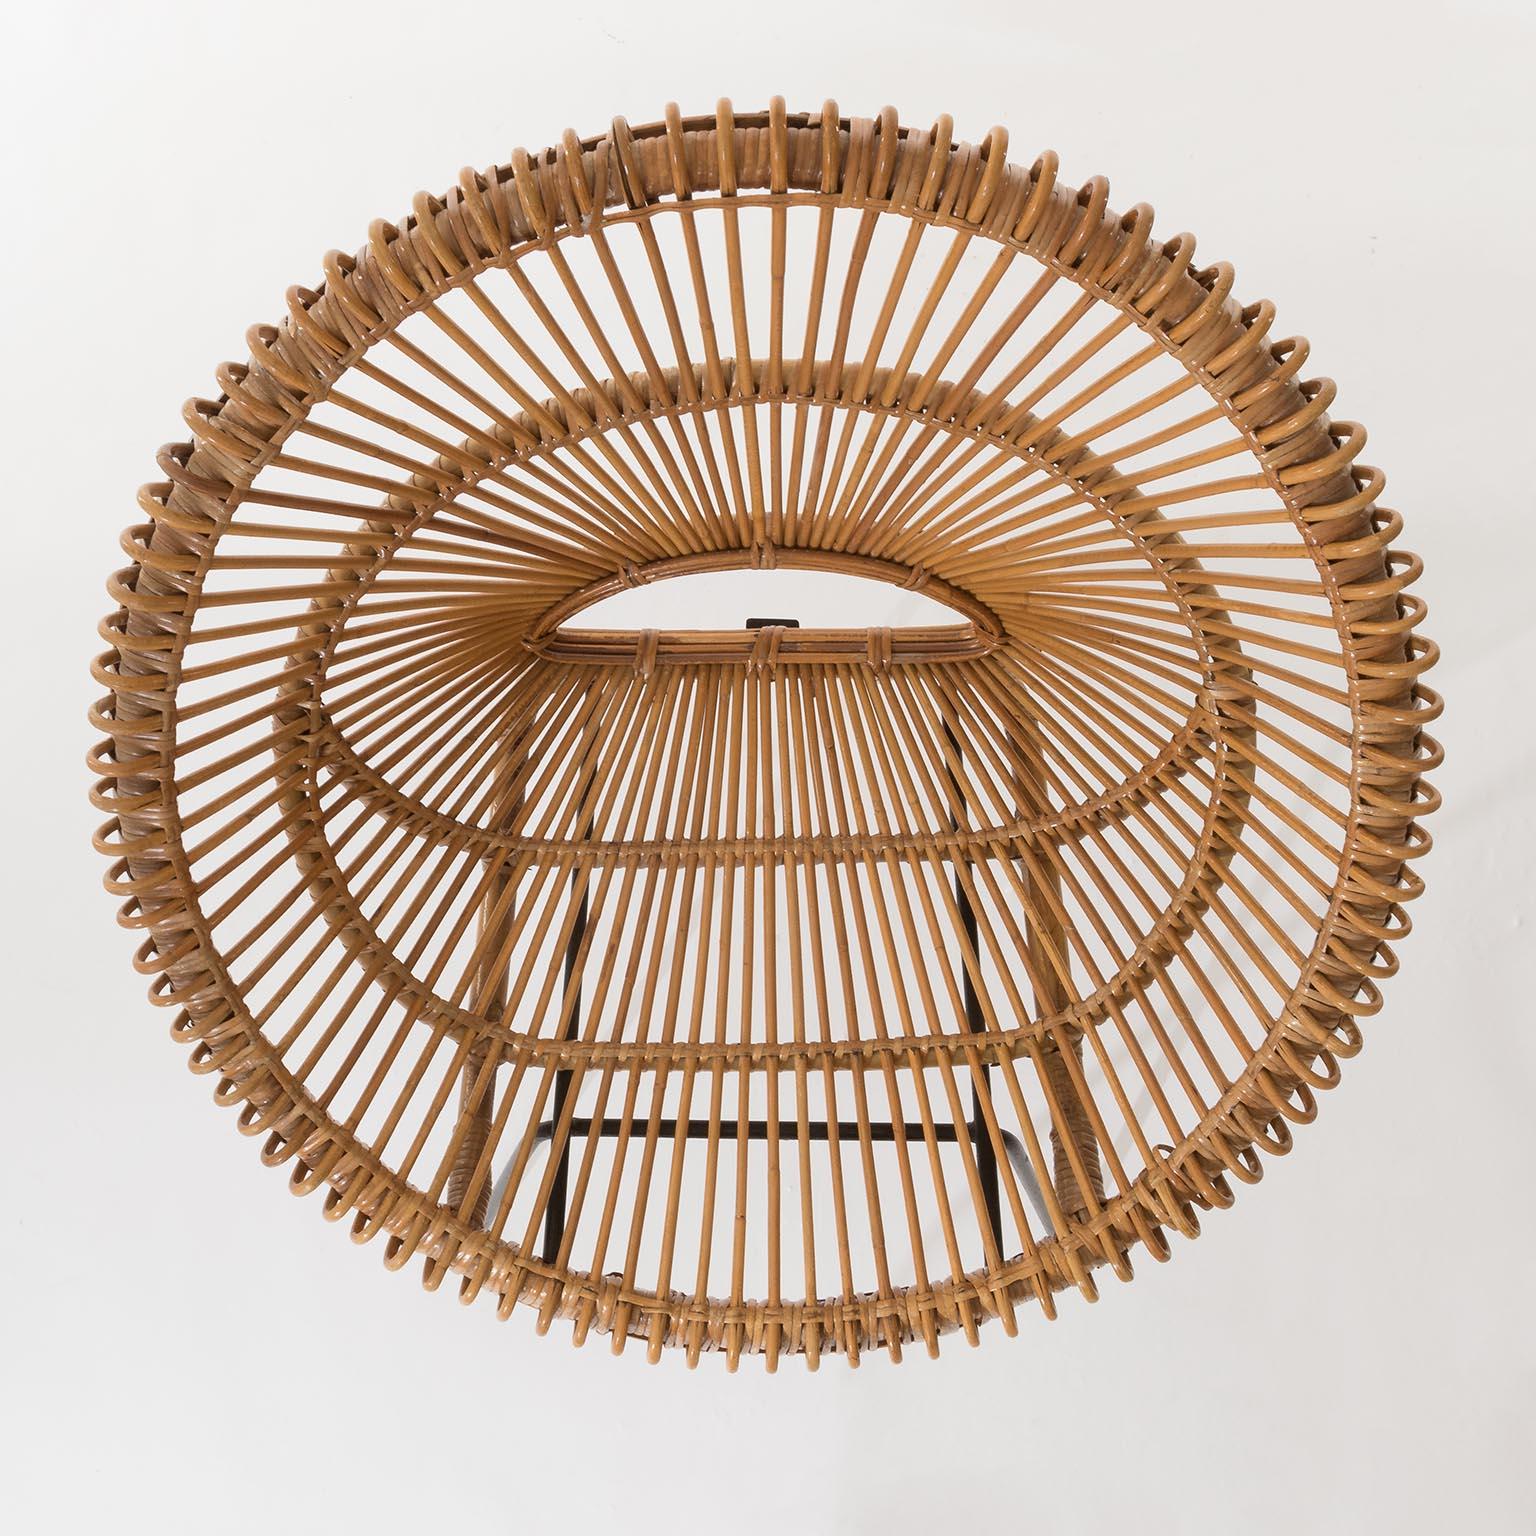 Metal Set Four Mid-Century Modern Rattan Bamboo Chairs, Janine Abraham, Dirk Rol, 1960 For Sale